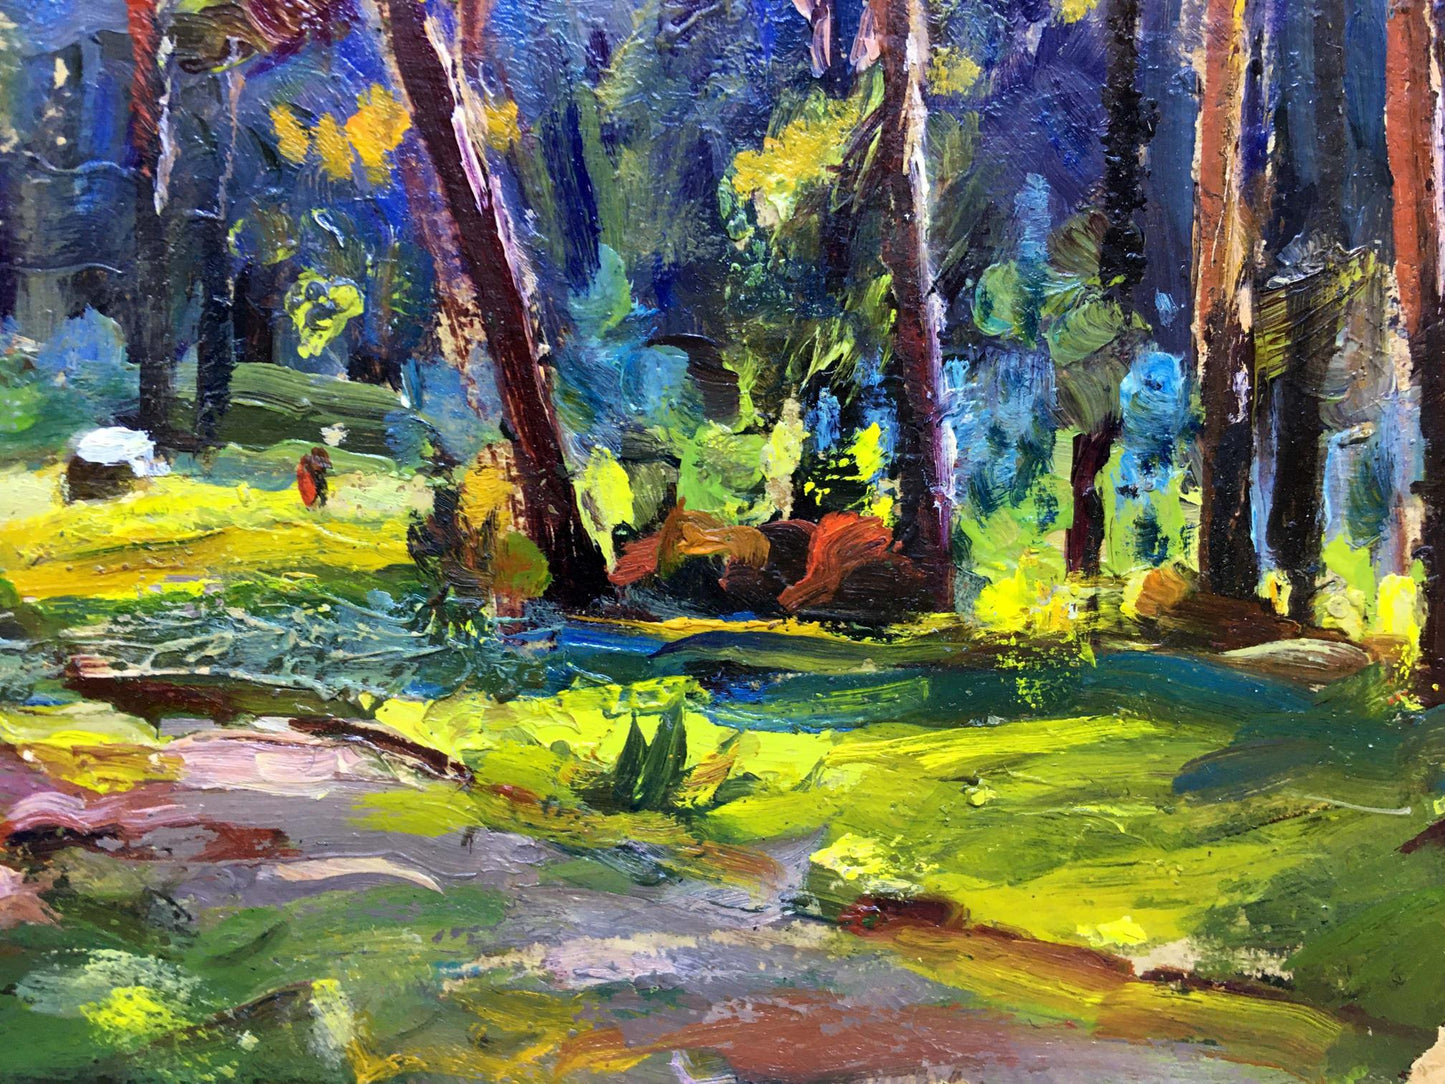 Oil painting Walk in the woods Popov I. A.